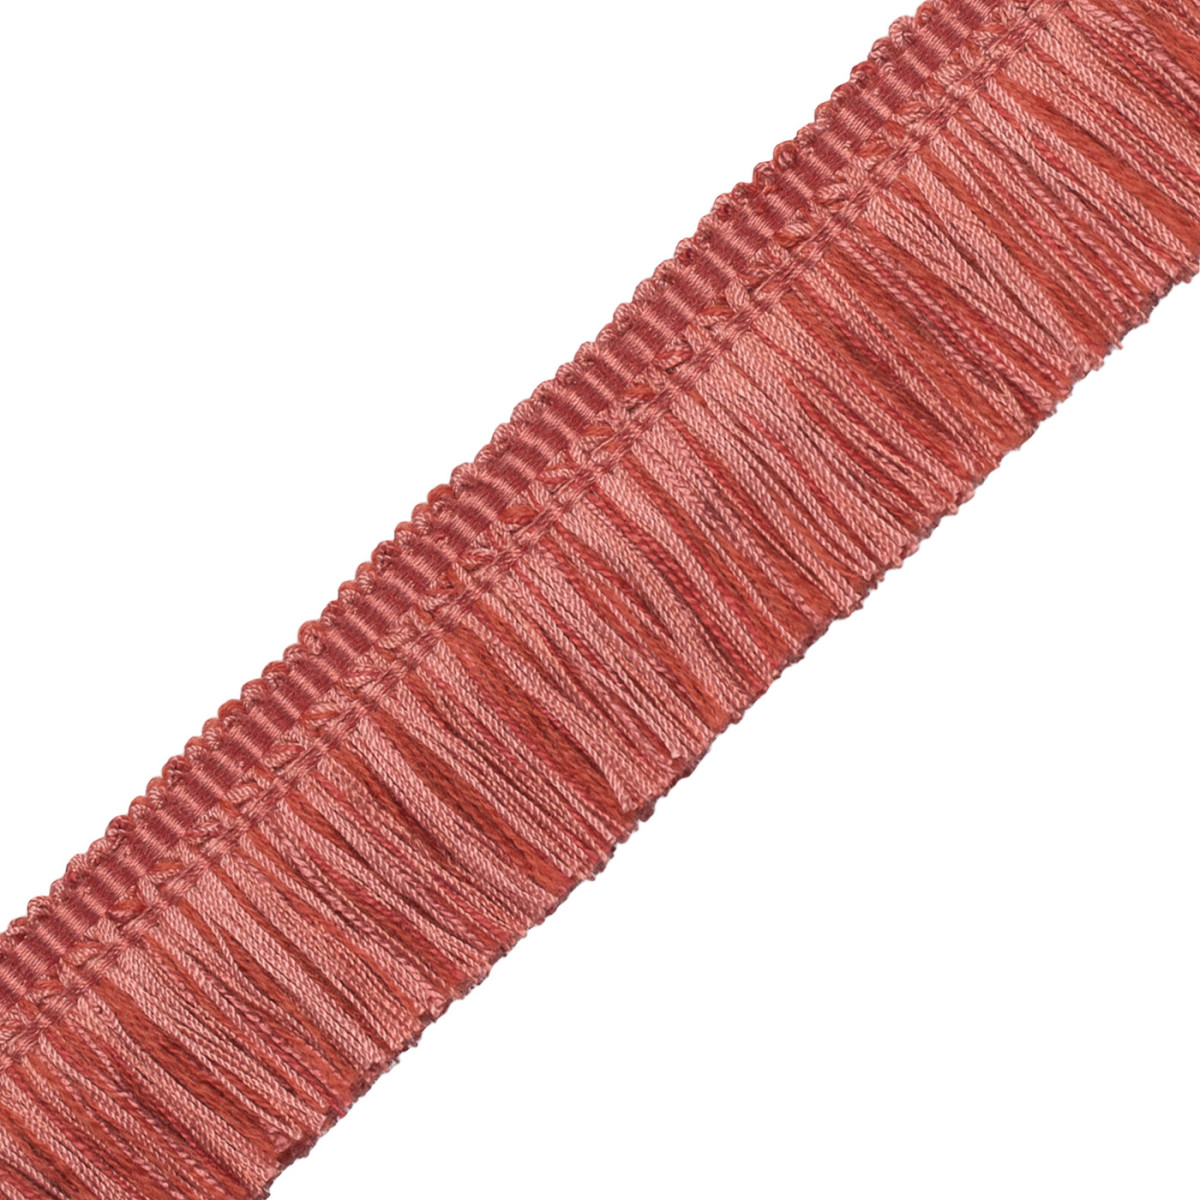 1.5 ANNECY BRUSH FRINGE - CORAL - Samuel and Sons